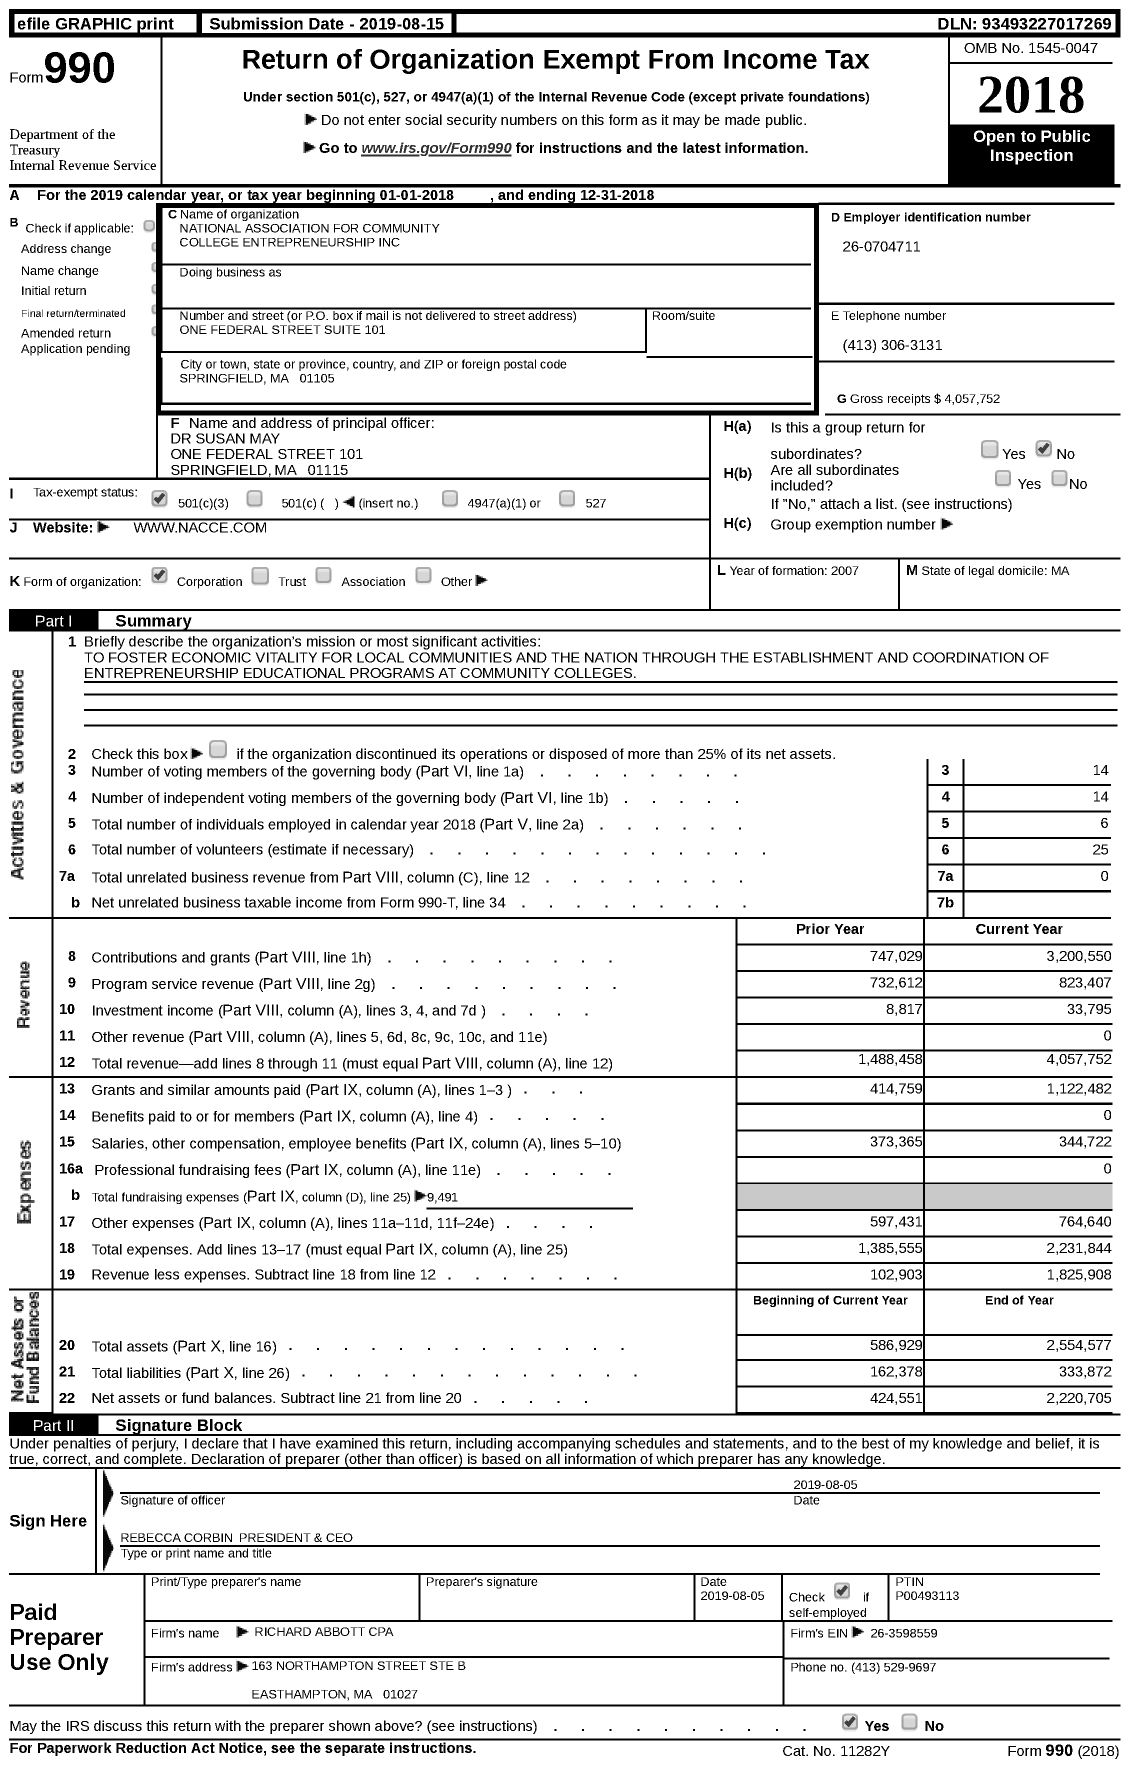 Image of first page of 2018 Form 990 for National Association for Community College Entrepreneurship (NACCE)